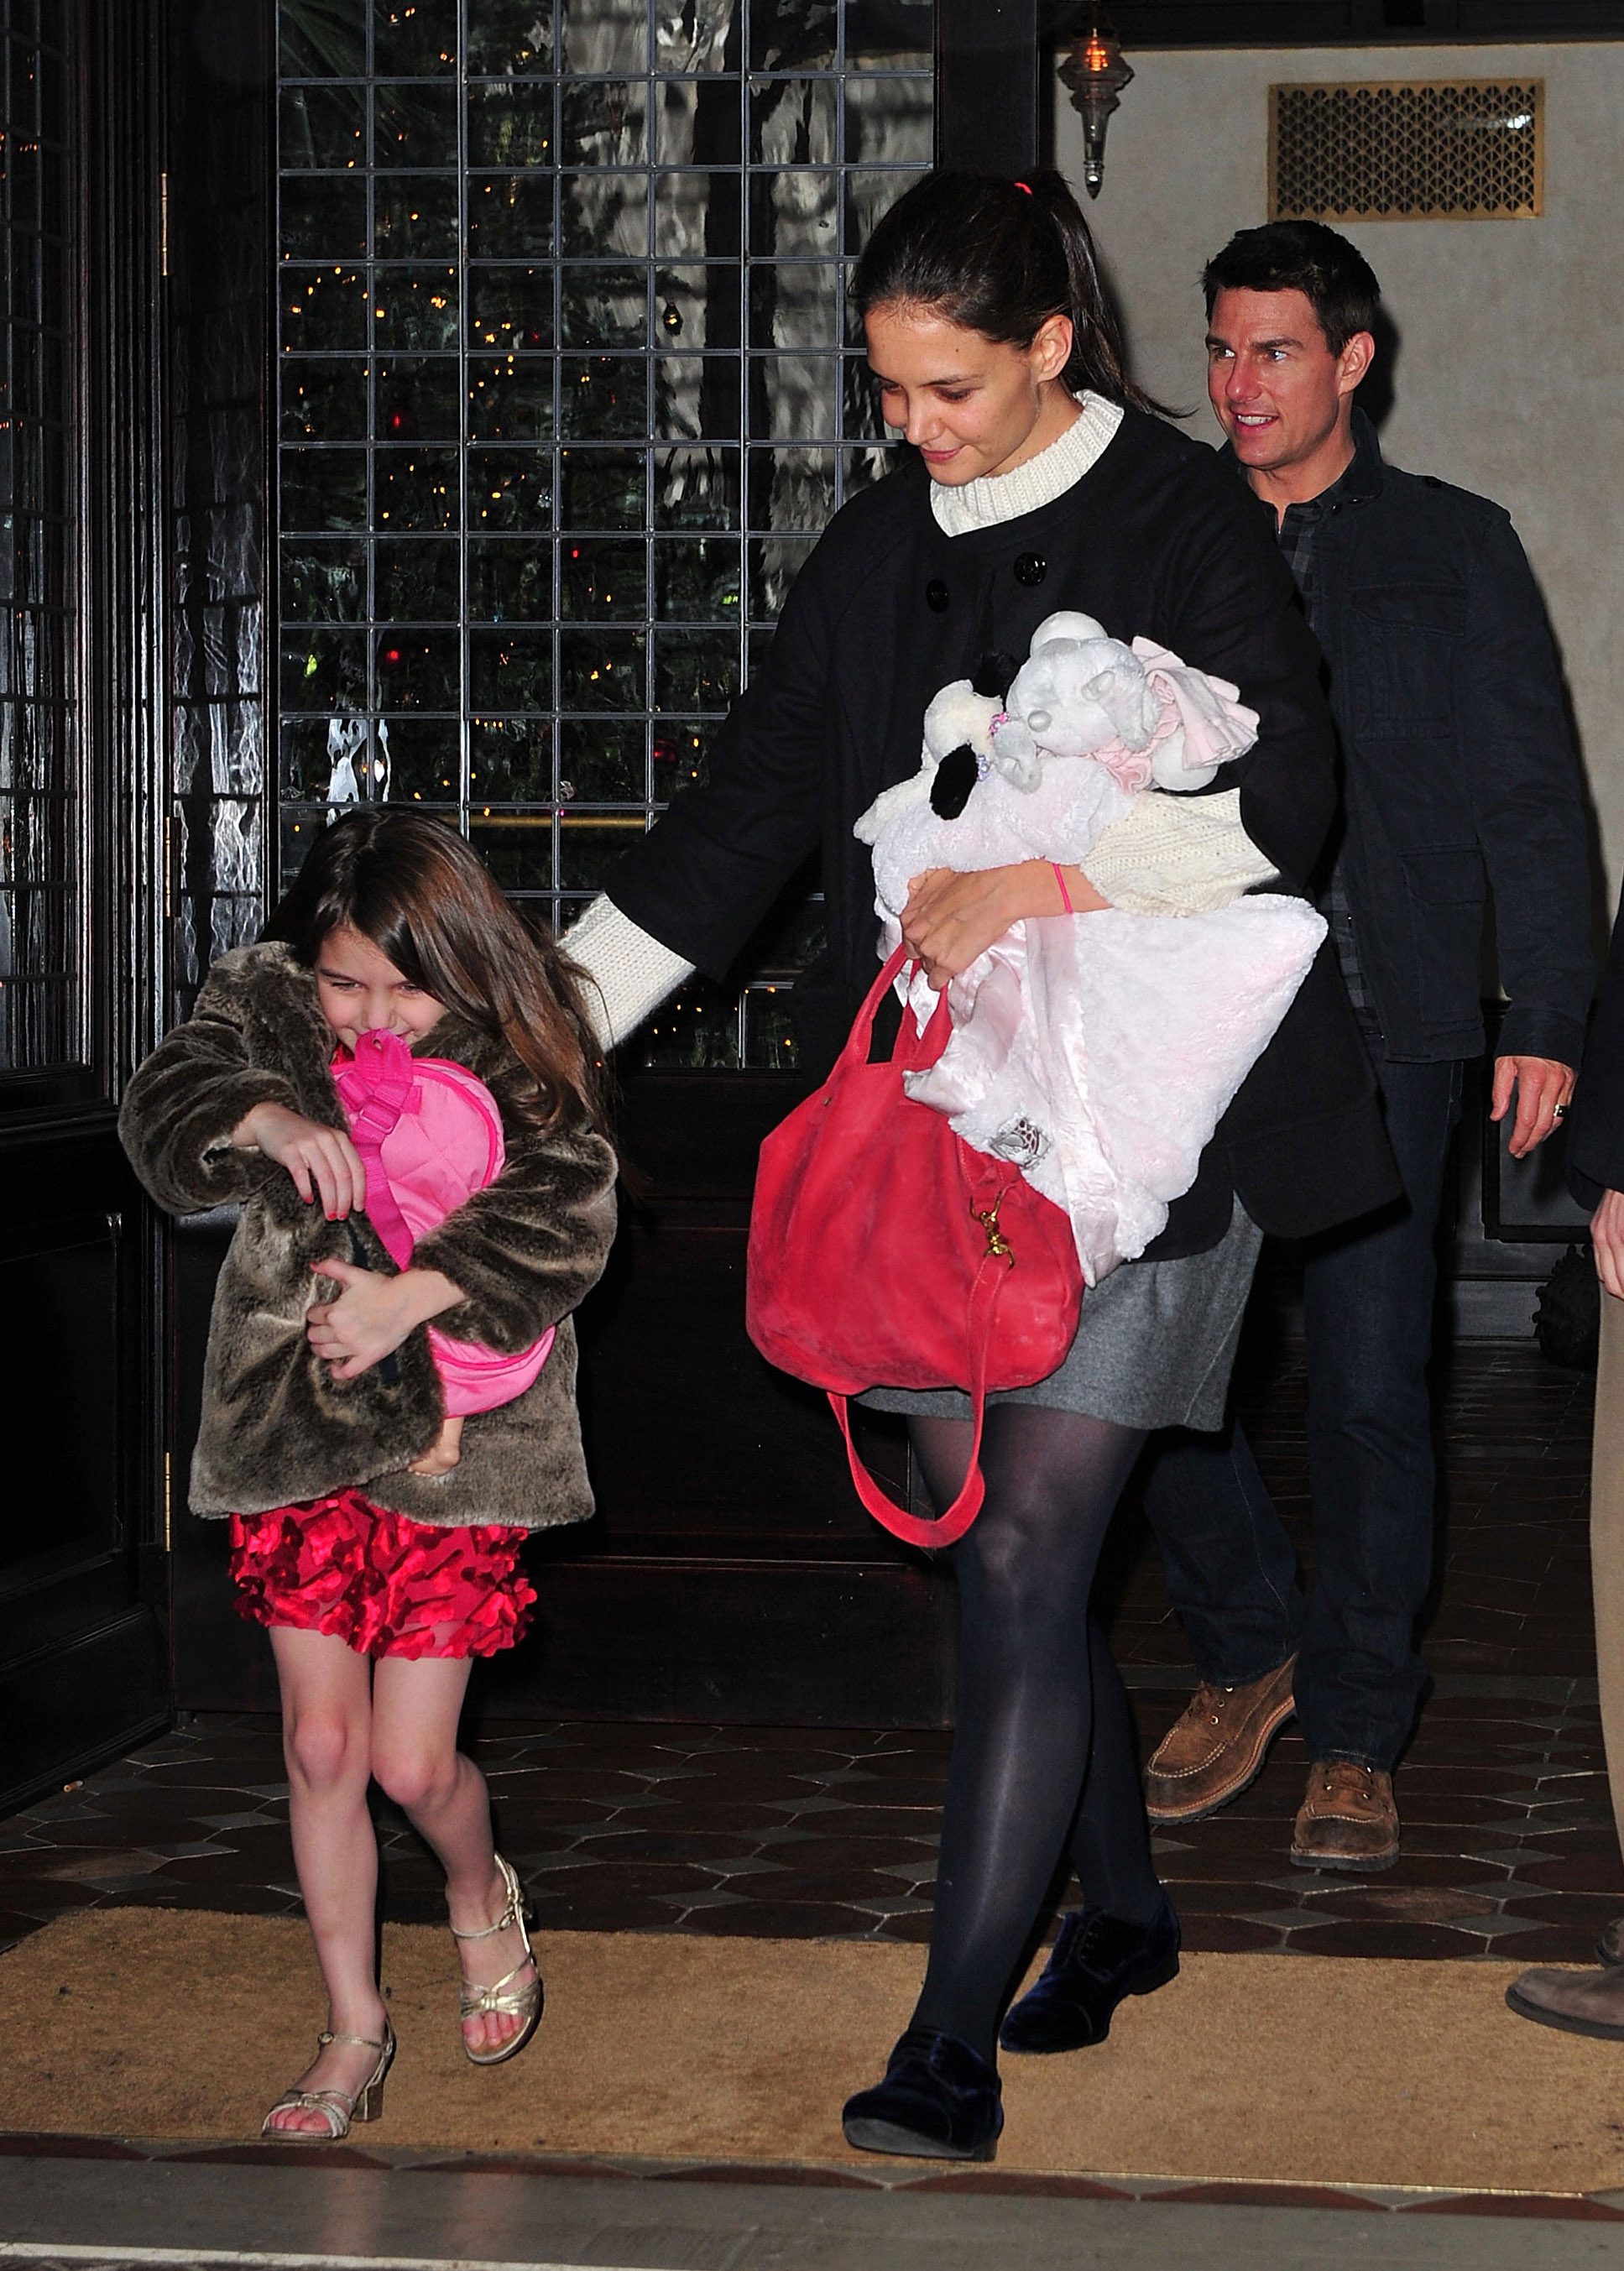 Suri Cruise, Katie Holmes, and Tom Cruise spotted in New York City on December 20, 2011 | Source: Getty Images